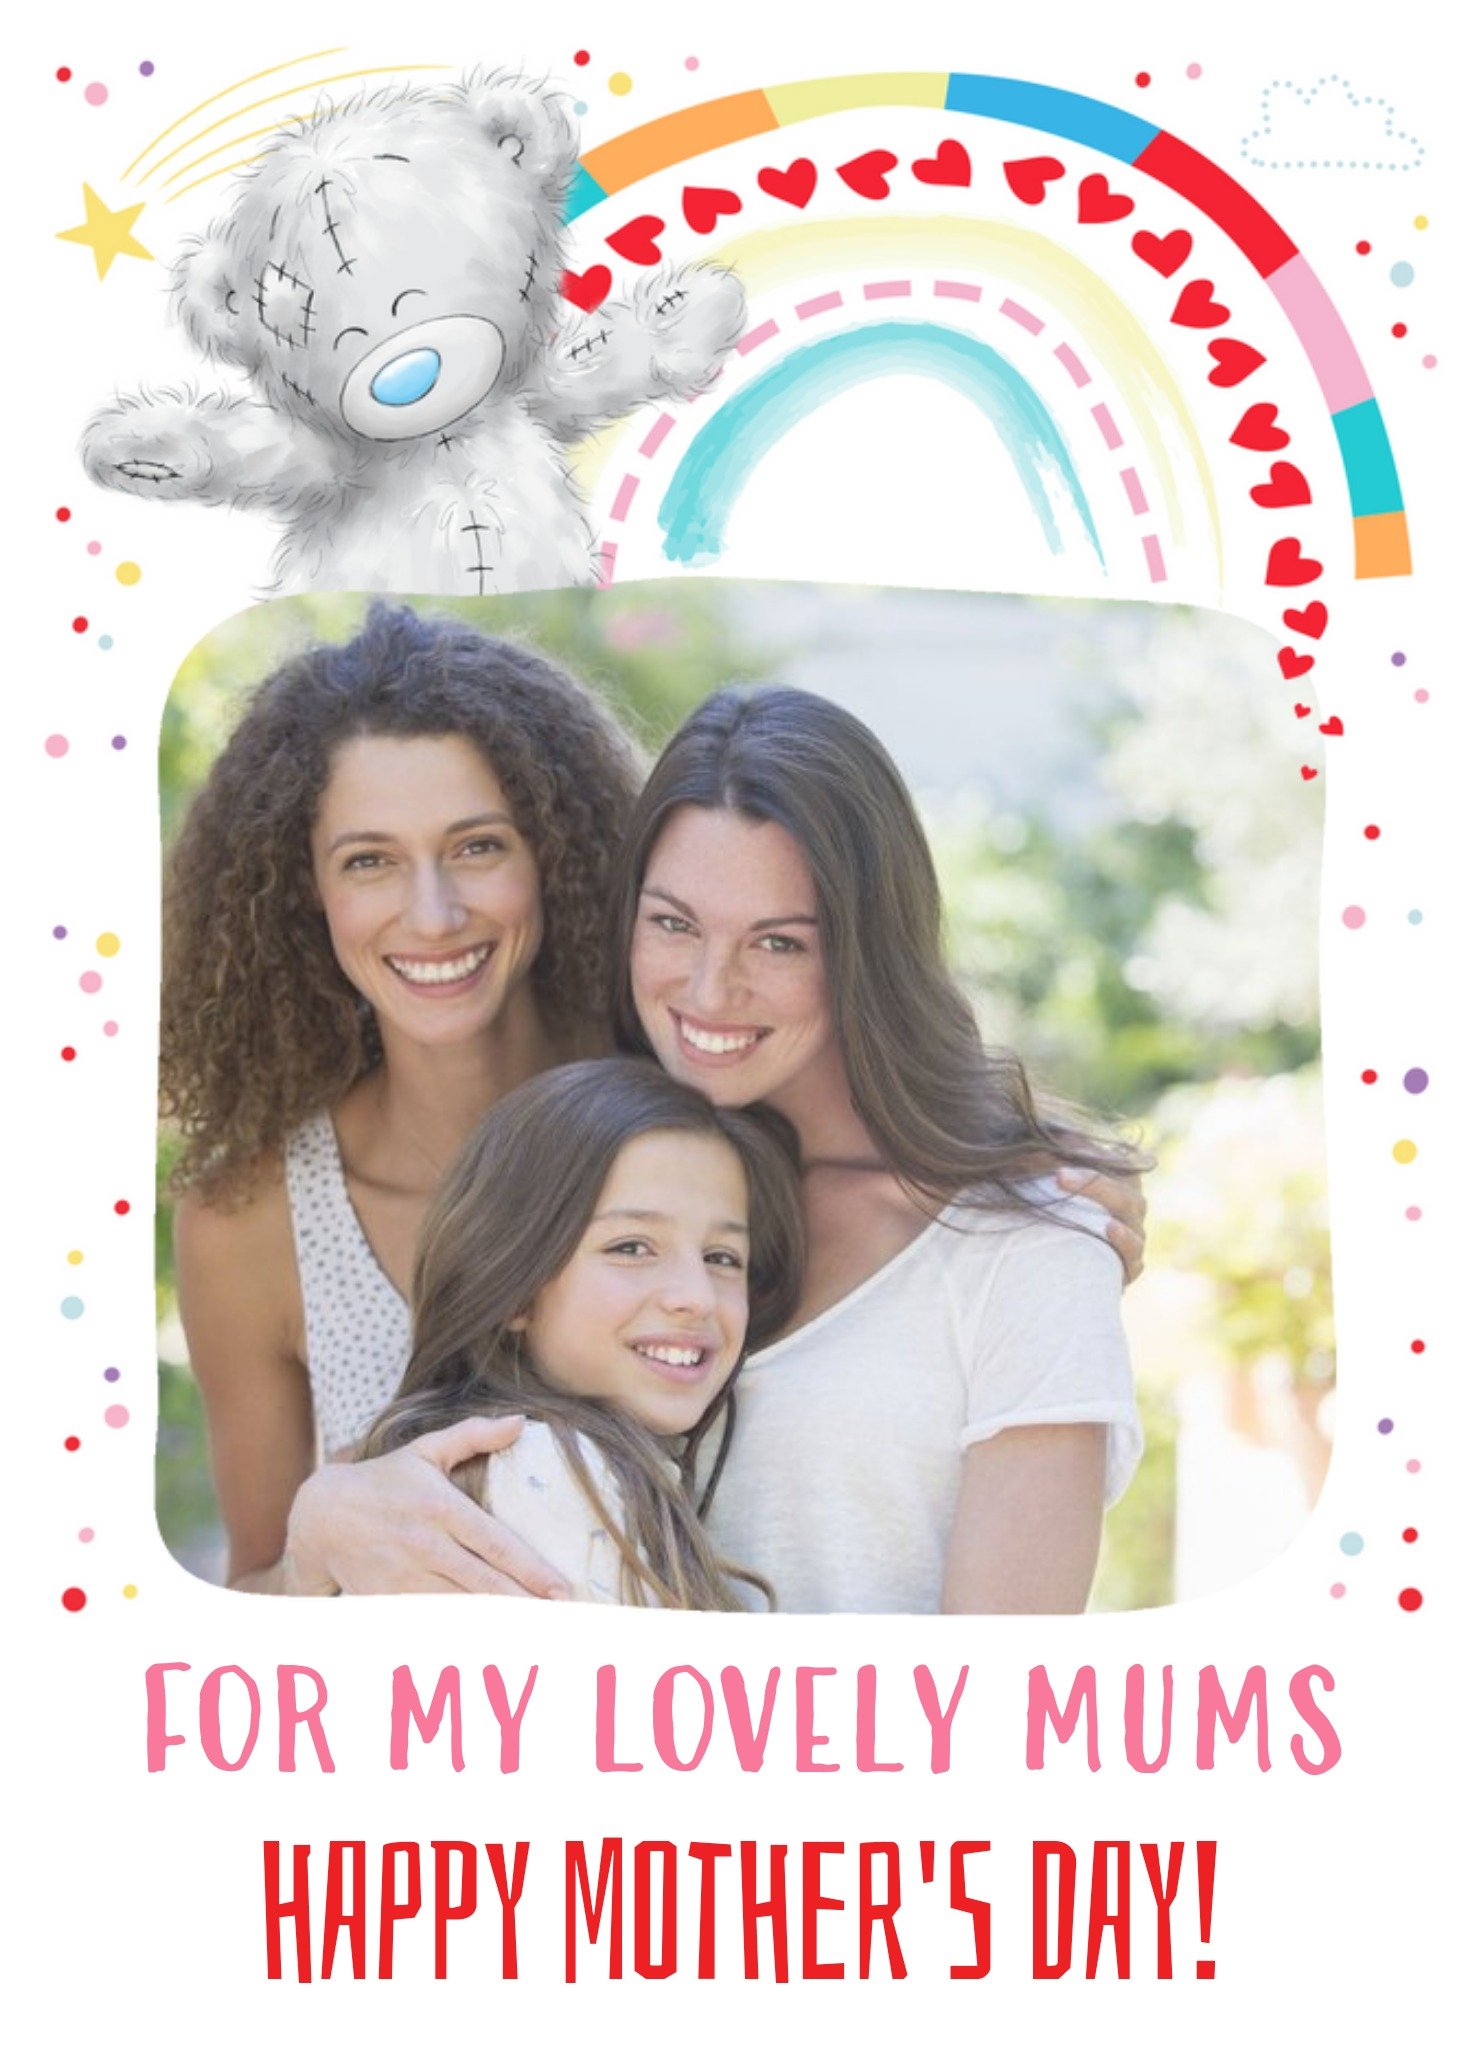 Me To You For My Lovely Mums Lesbian Couple LGBTQ+ Happy Mothers Day Card Ecard